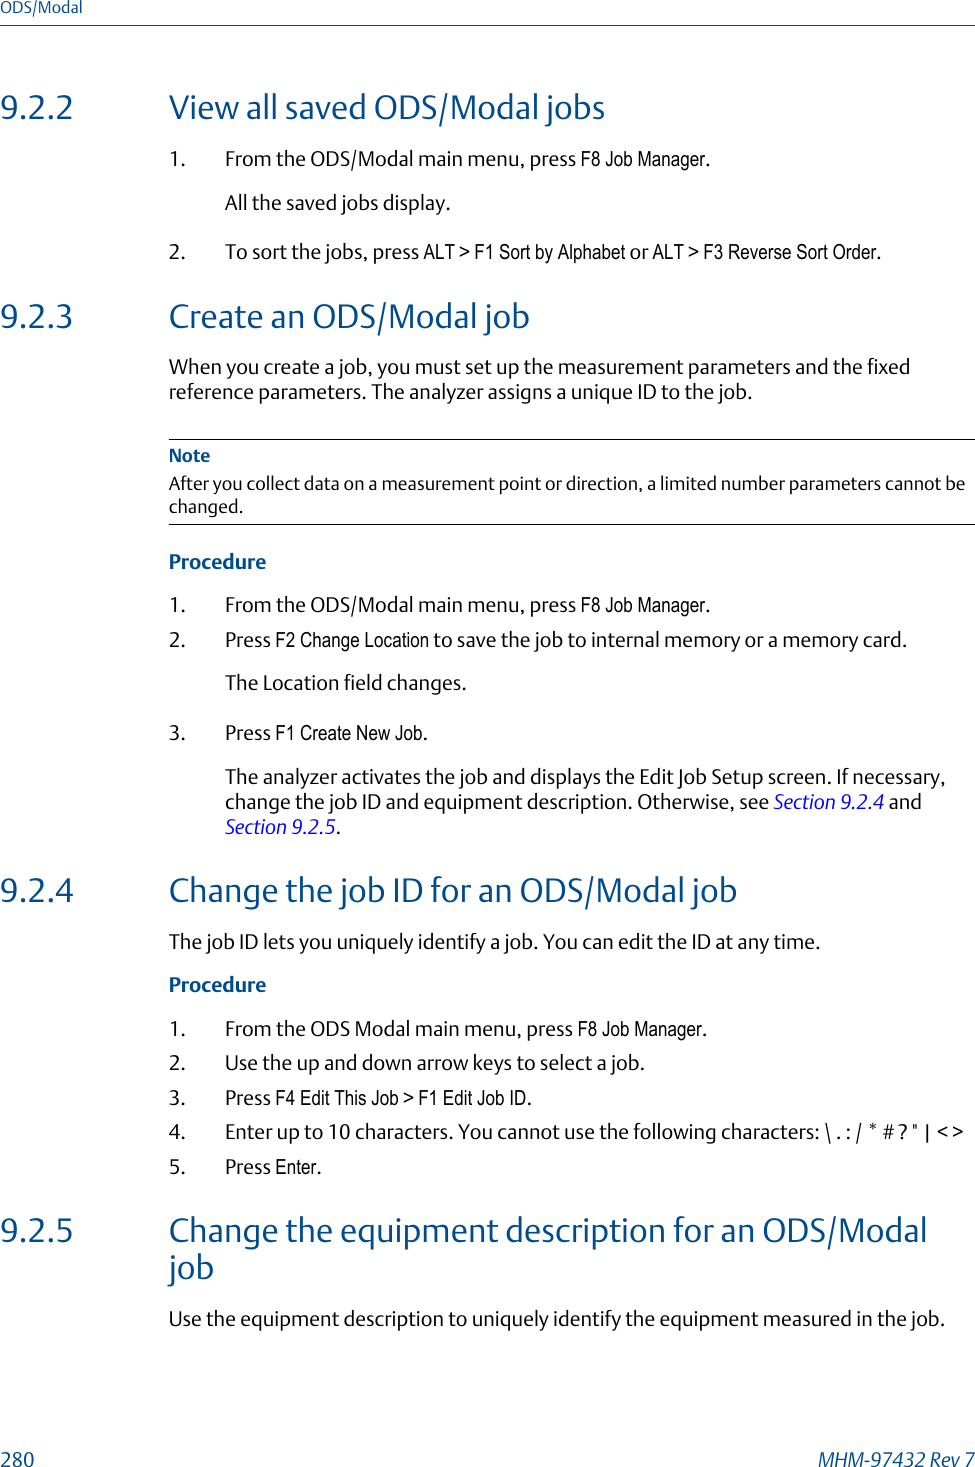 9.2.2 View all saved ODS/Modal jobs1. From the ODS/Modal main menu, press F8 Job Manager.All the saved jobs display.2. To sort the jobs, press ALT &gt; F1 Sort by Alphabet or ALT &gt; F3 Reverse Sort Order.9.2.3 Create an ODS/Modal jobWhen you create a job, you must set up the measurement parameters and the fixedreference parameters. The analyzer assigns a unique ID to the job.NoteAfter you collect data on a measurement point or direction, a limited number parameters cannot bechanged.Procedure1. From the ODS/Modal main menu, press F8 Job Manager.2. Press F2 Change Location to save the job to internal memory or a memory card.The Location field changes.3. Press F1 Create New Job.The analyzer activates the job and displays the Edit Job Setup screen. If necessary,change the job ID and equipment description. Otherwise, see Section 9.2.4 and Section 9.2.5.9.2.4 Change the job ID for an ODS/Modal jobThe job ID lets you uniquely identify a job. You can edit the ID at any time.Procedure1. From the ODS Modal main menu, press F8 Job Manager.2. Use the up and down arrow keys to select a job.3. Press F4 Edit This Job &gt; F1 Edit Job ID.4. Enter up to 10 characters. You cannot use the following characters: \ . : / * # ? &quot; | &lt; &gt;5. Press Enter.9.2.5 Change the equipment description for an ODS/ModaljobUse the equipment description to uniquely identify the equipment measured in the job.ODS/Modal280 MHM-97432 Rev 7